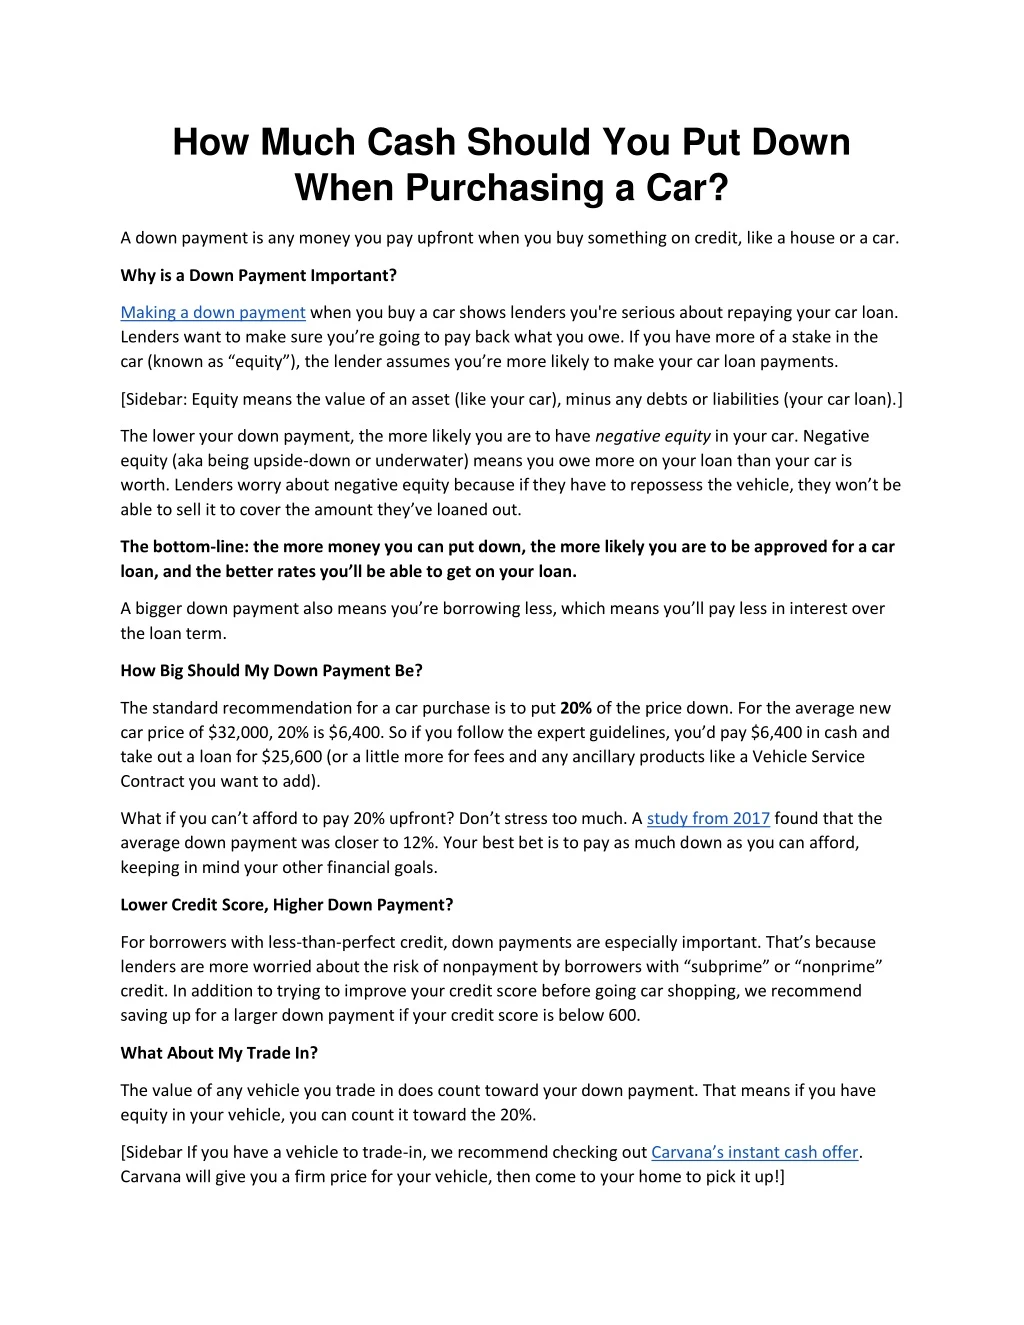 how much cash should you put down when purchasing